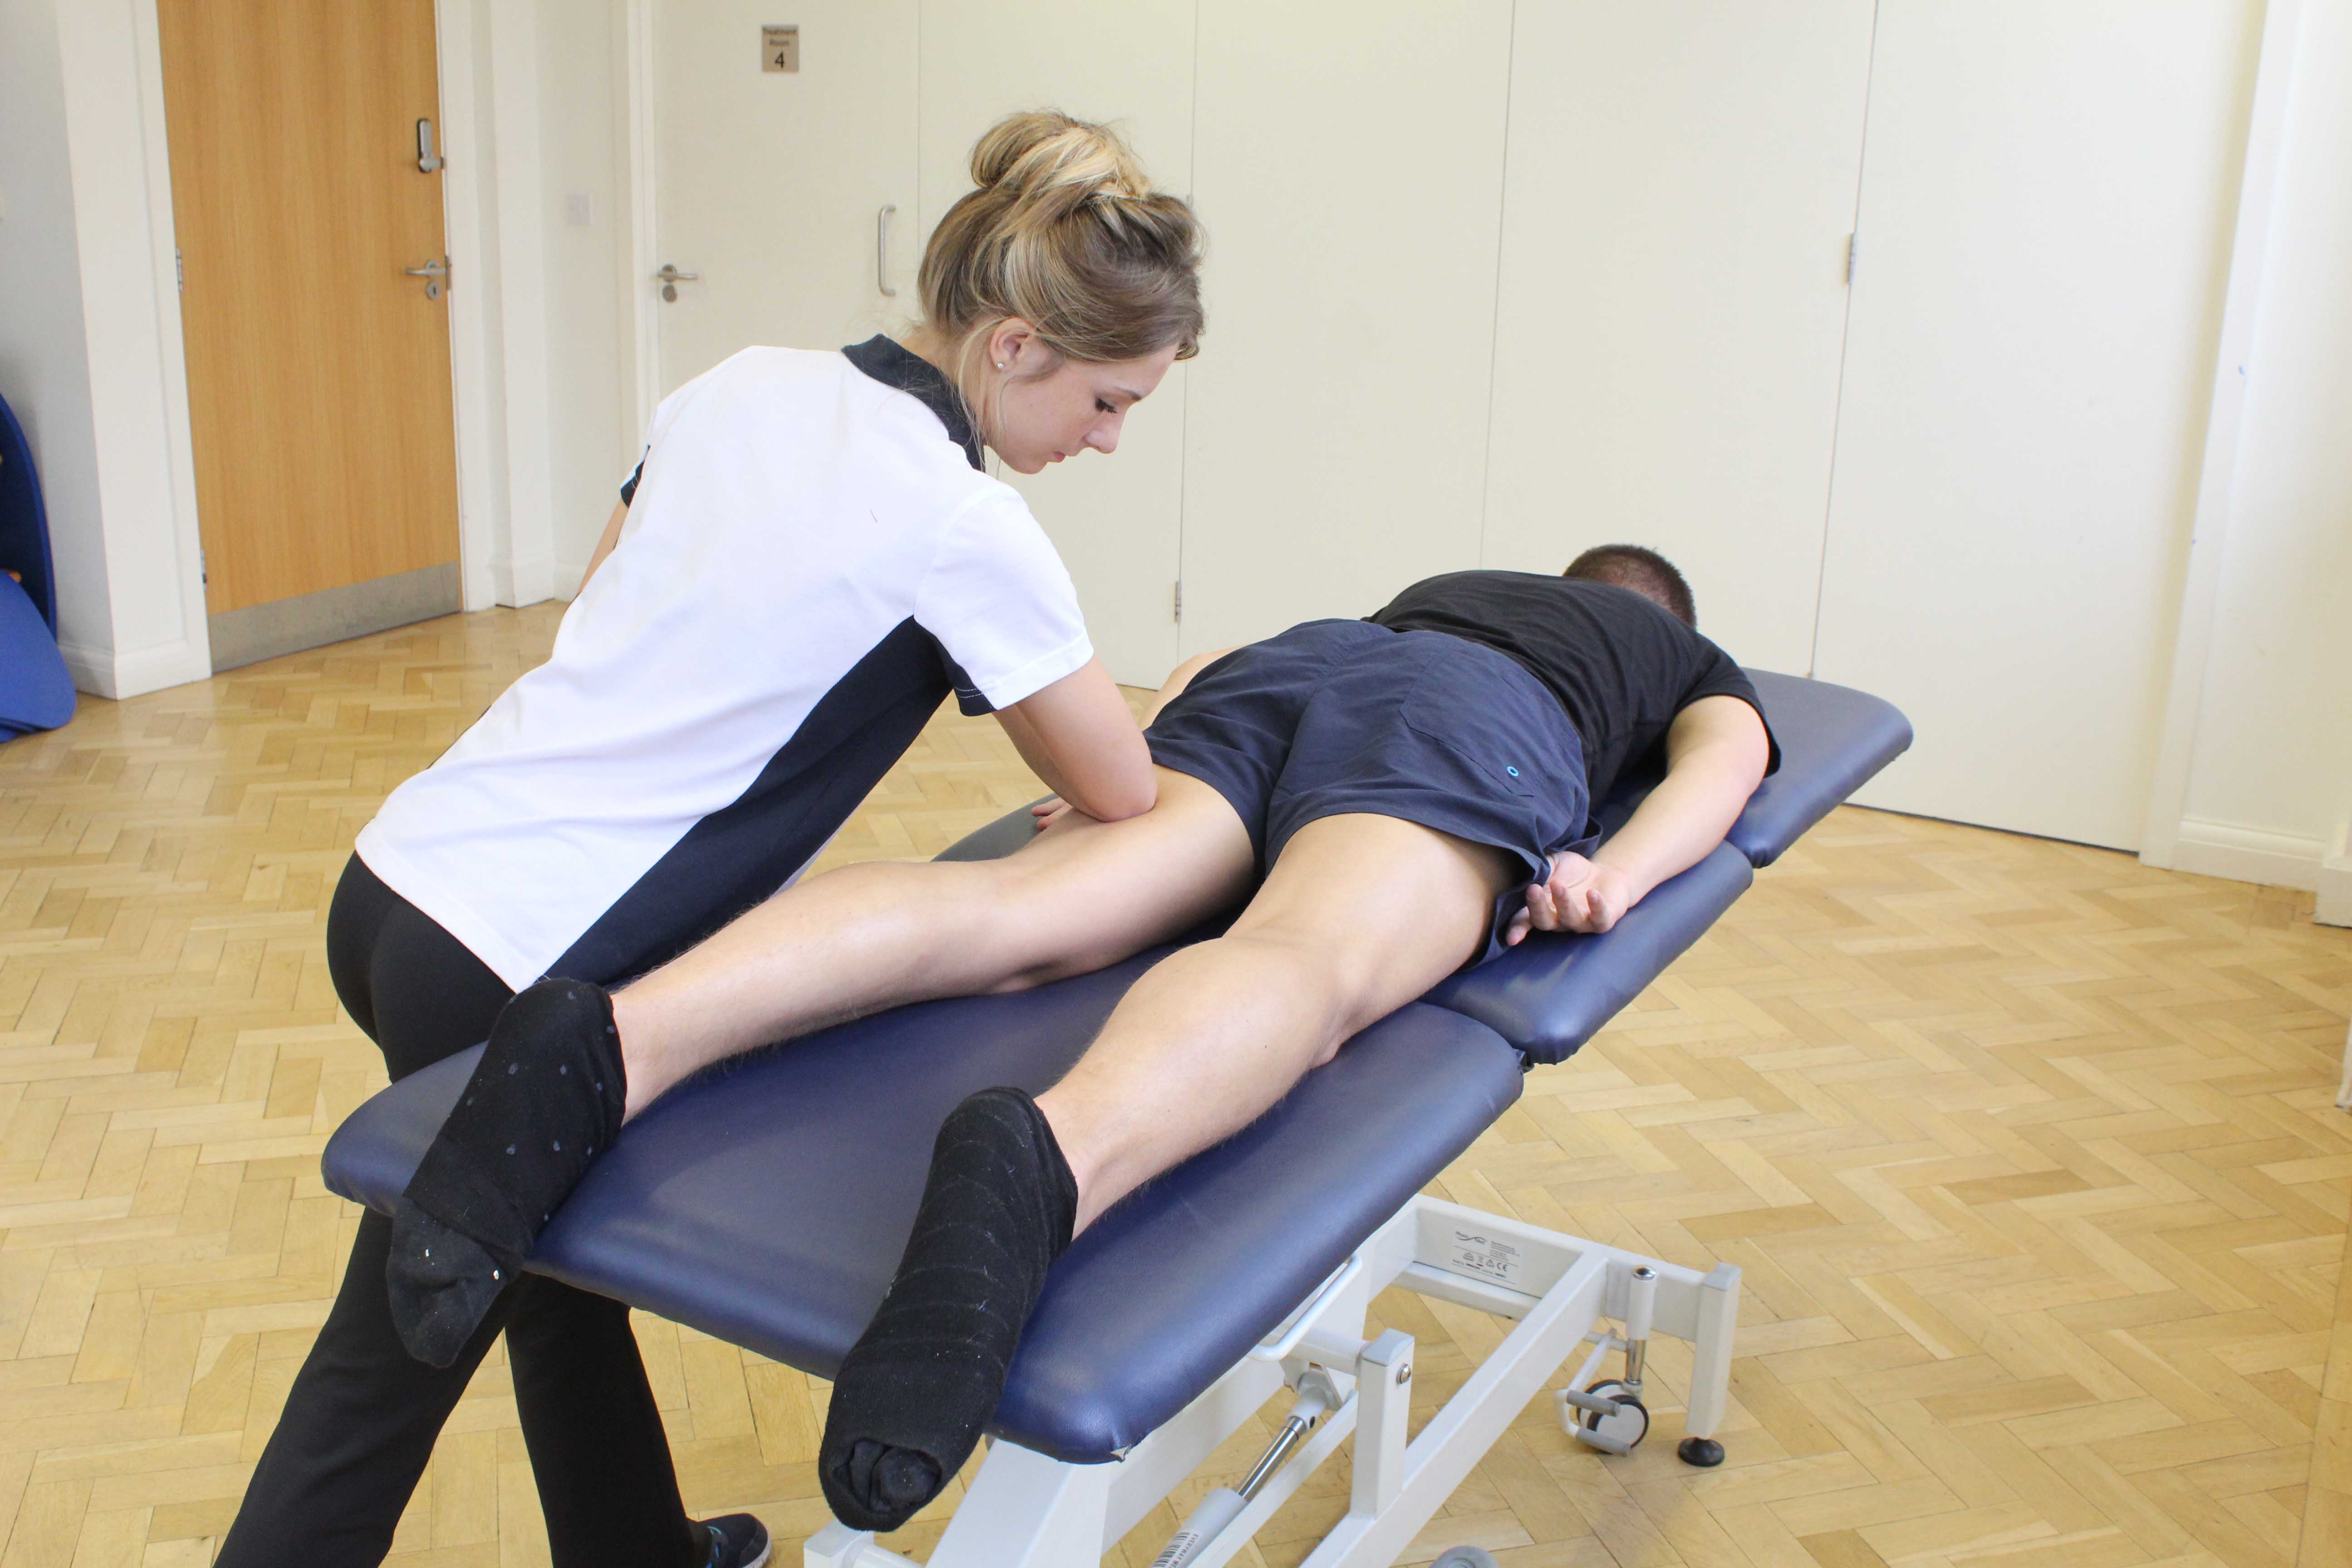 Soft tissue mobilisation of the hamstring muscles helps reduce tension and aching